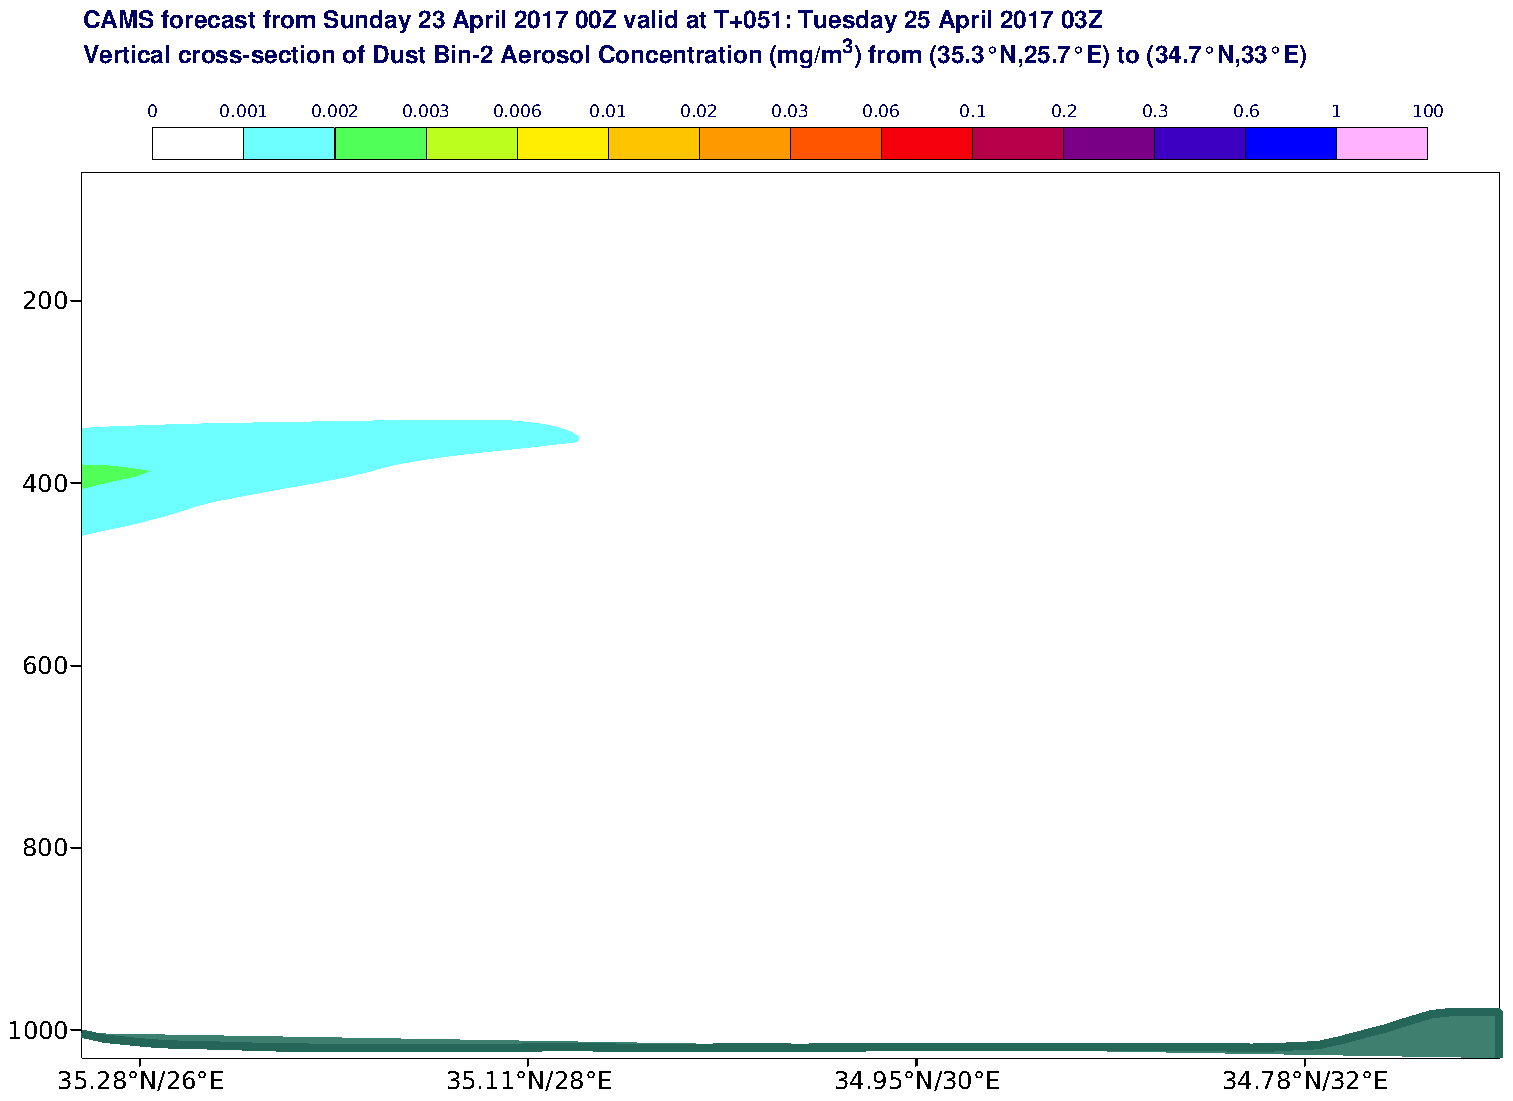 Vertical cross-section of Dust Bin-2 Aerosol Concentration (mg/m3) valid at T51 - 2017-04-25 03:00